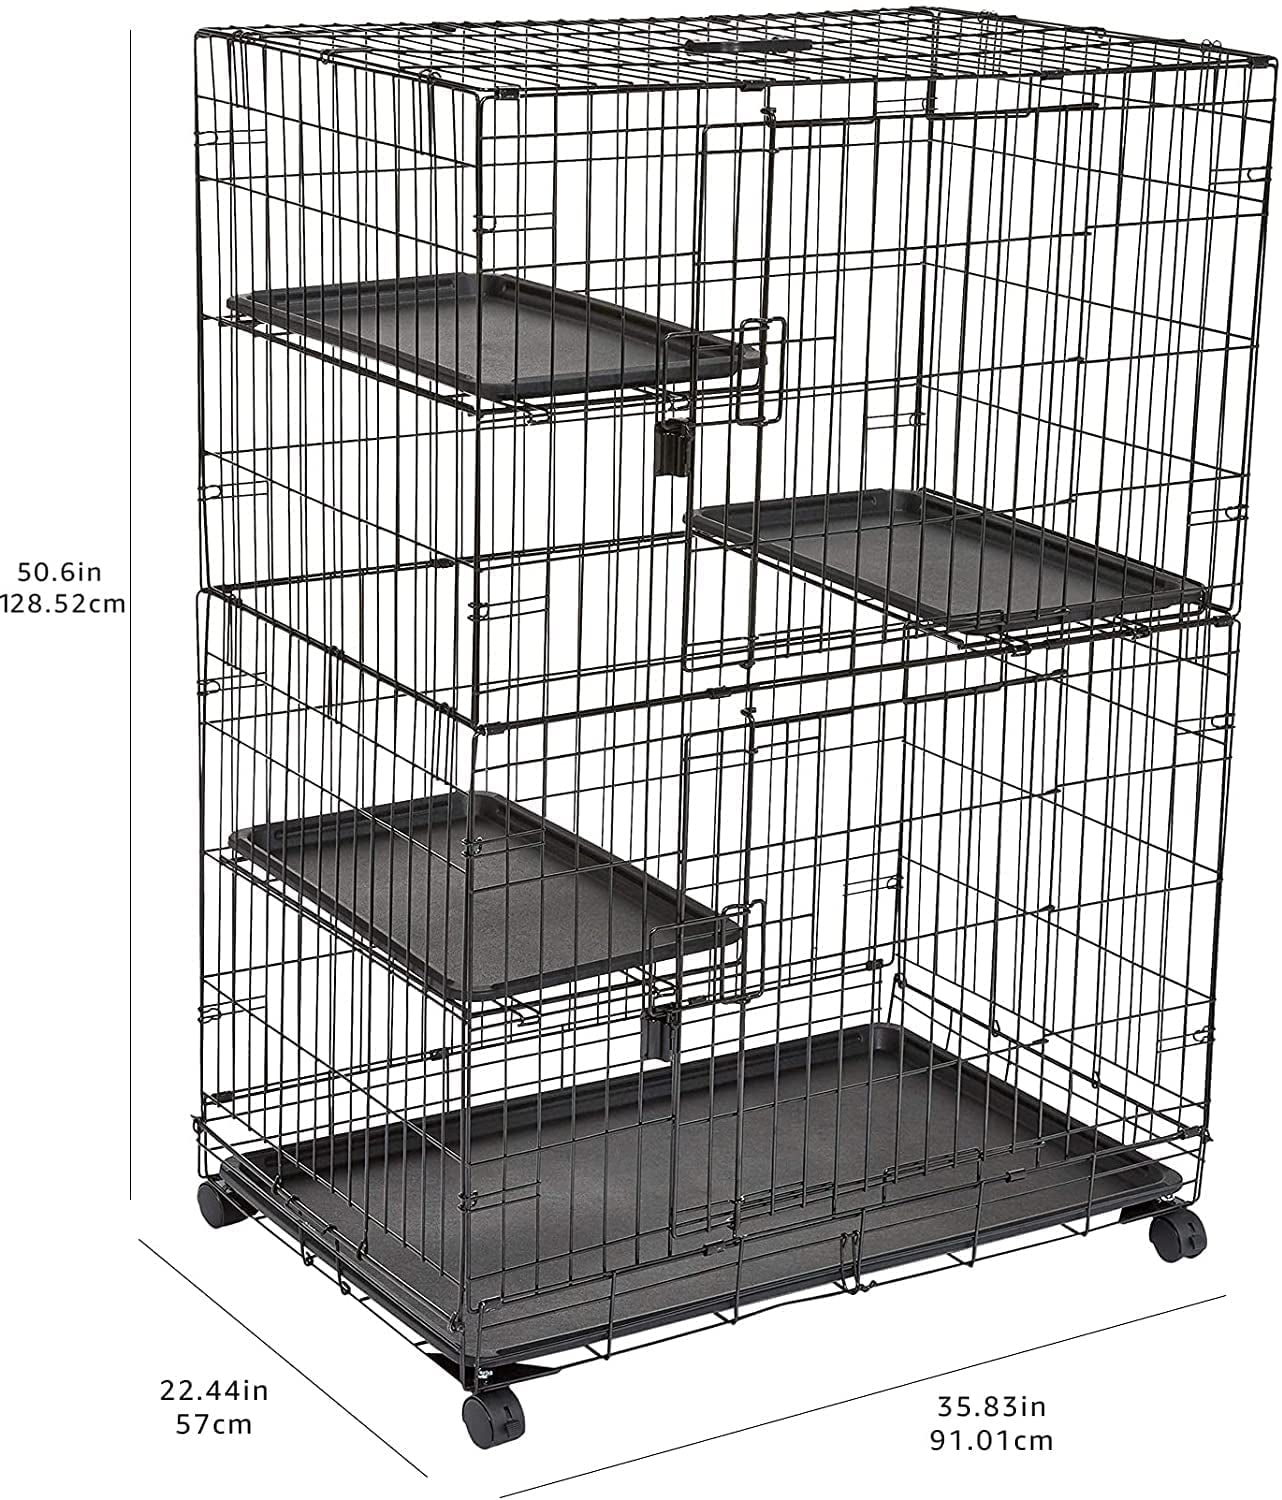 Large 3-Tier Cat Durable,Pliable Cage Playpen Box Crate Kennel - 35.8"L X 22.4"W X 50.6"H, Black